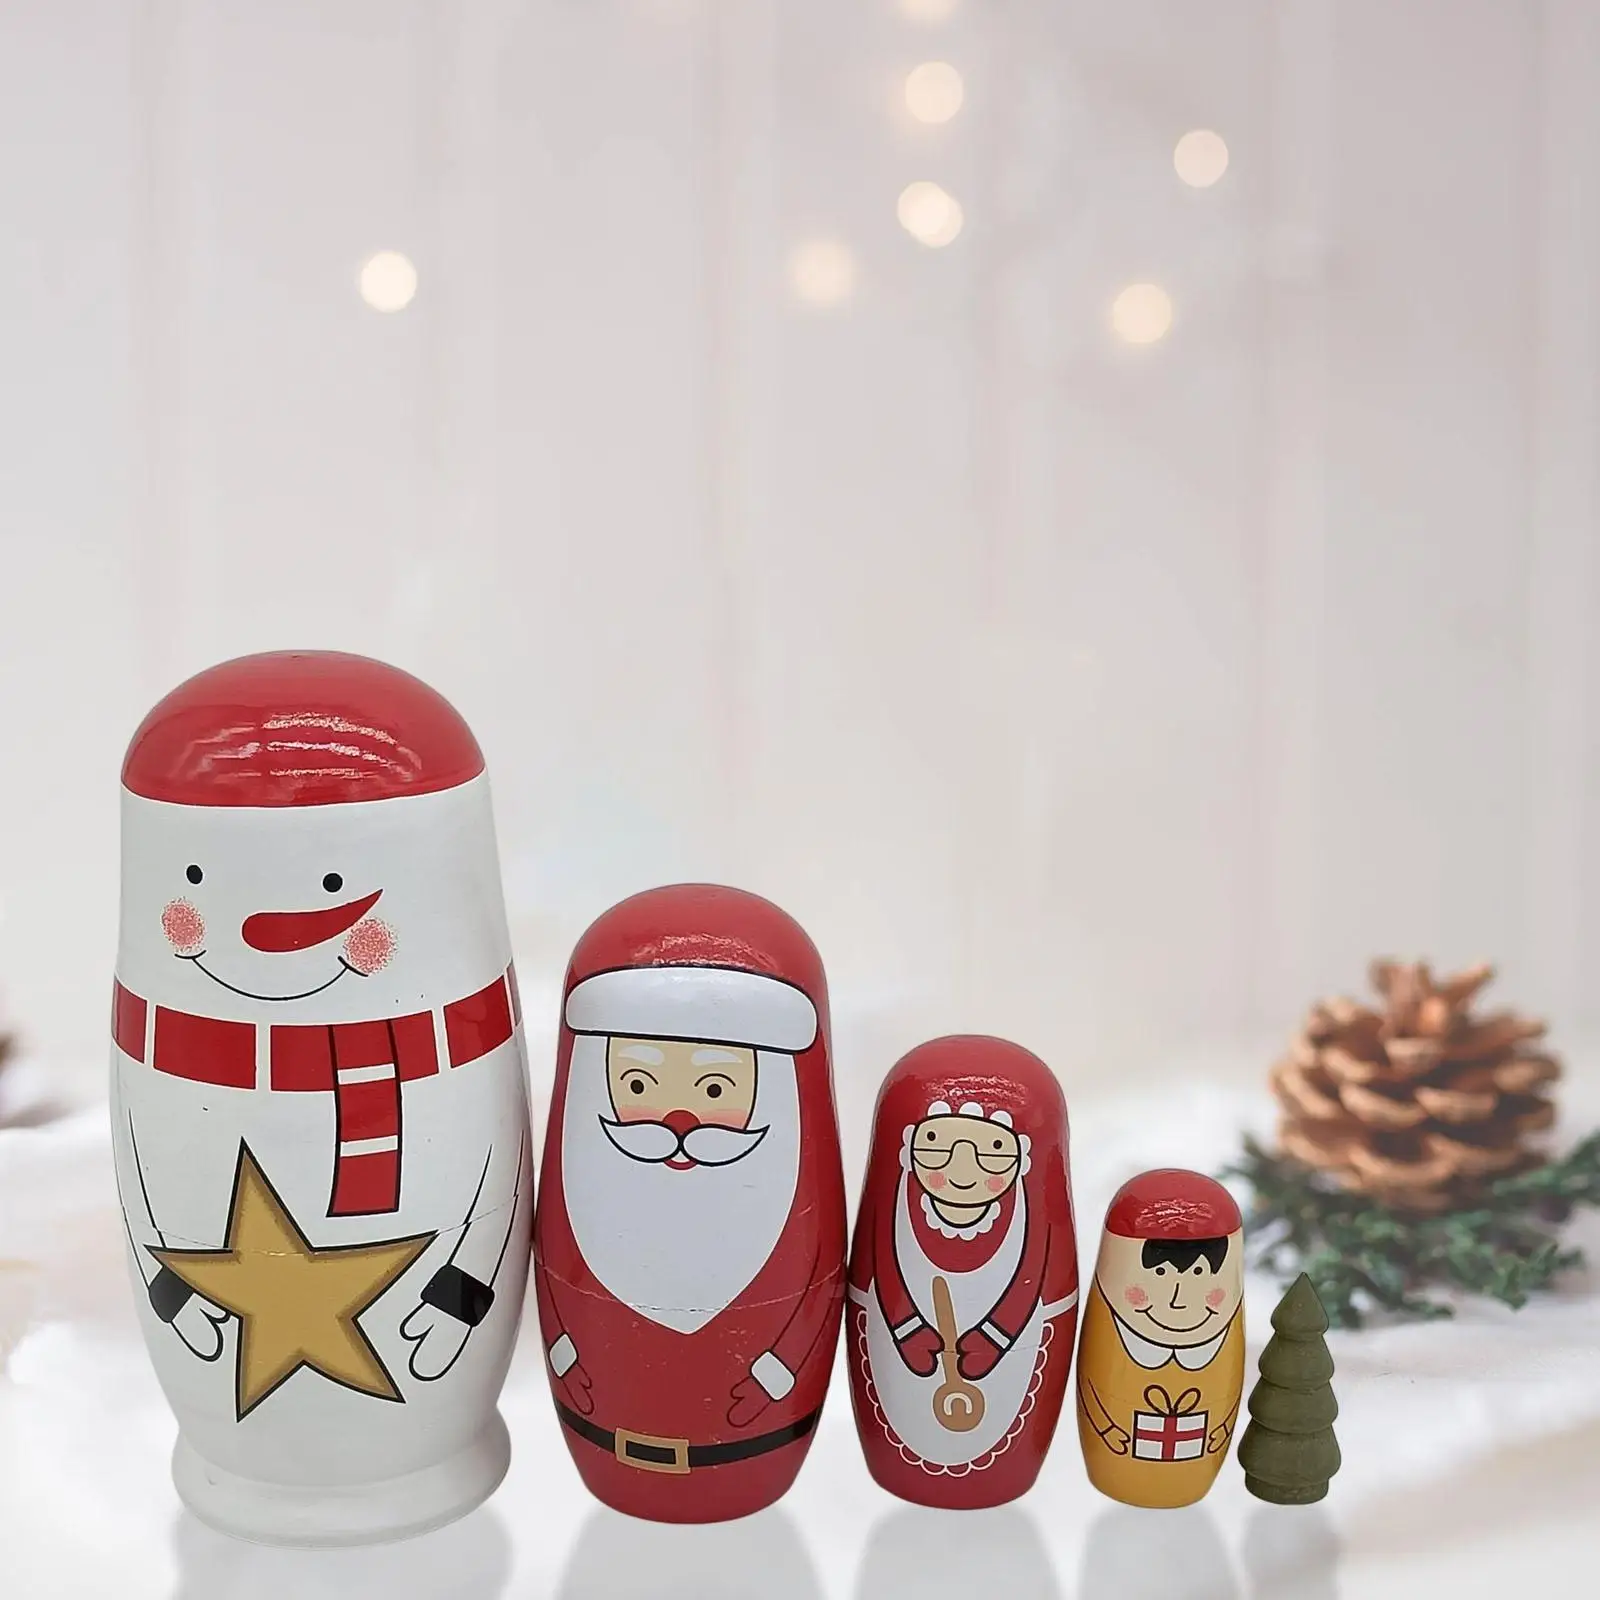 5x Wooden Russian Nesting Dolls Christmas Wood Crafts for Kids New Year Gift